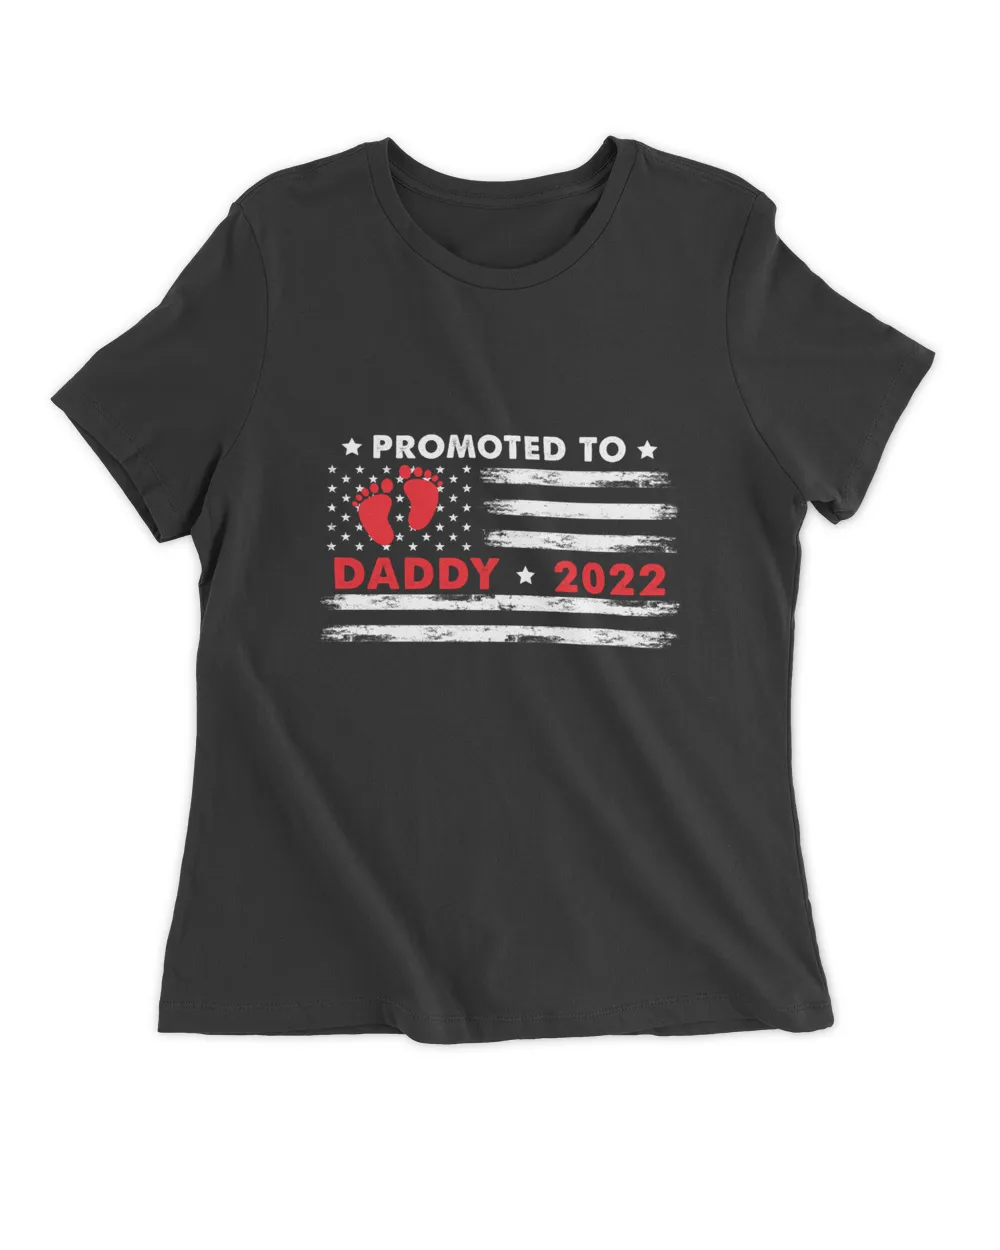 RD Promoted To Daddy Shirts, Dad Shirt, Pregnancy Announcement Shirt, Pregnancy Shirt, Dad EST. 2022 Shirt,Daddy Shirt,New Daddy Shirt